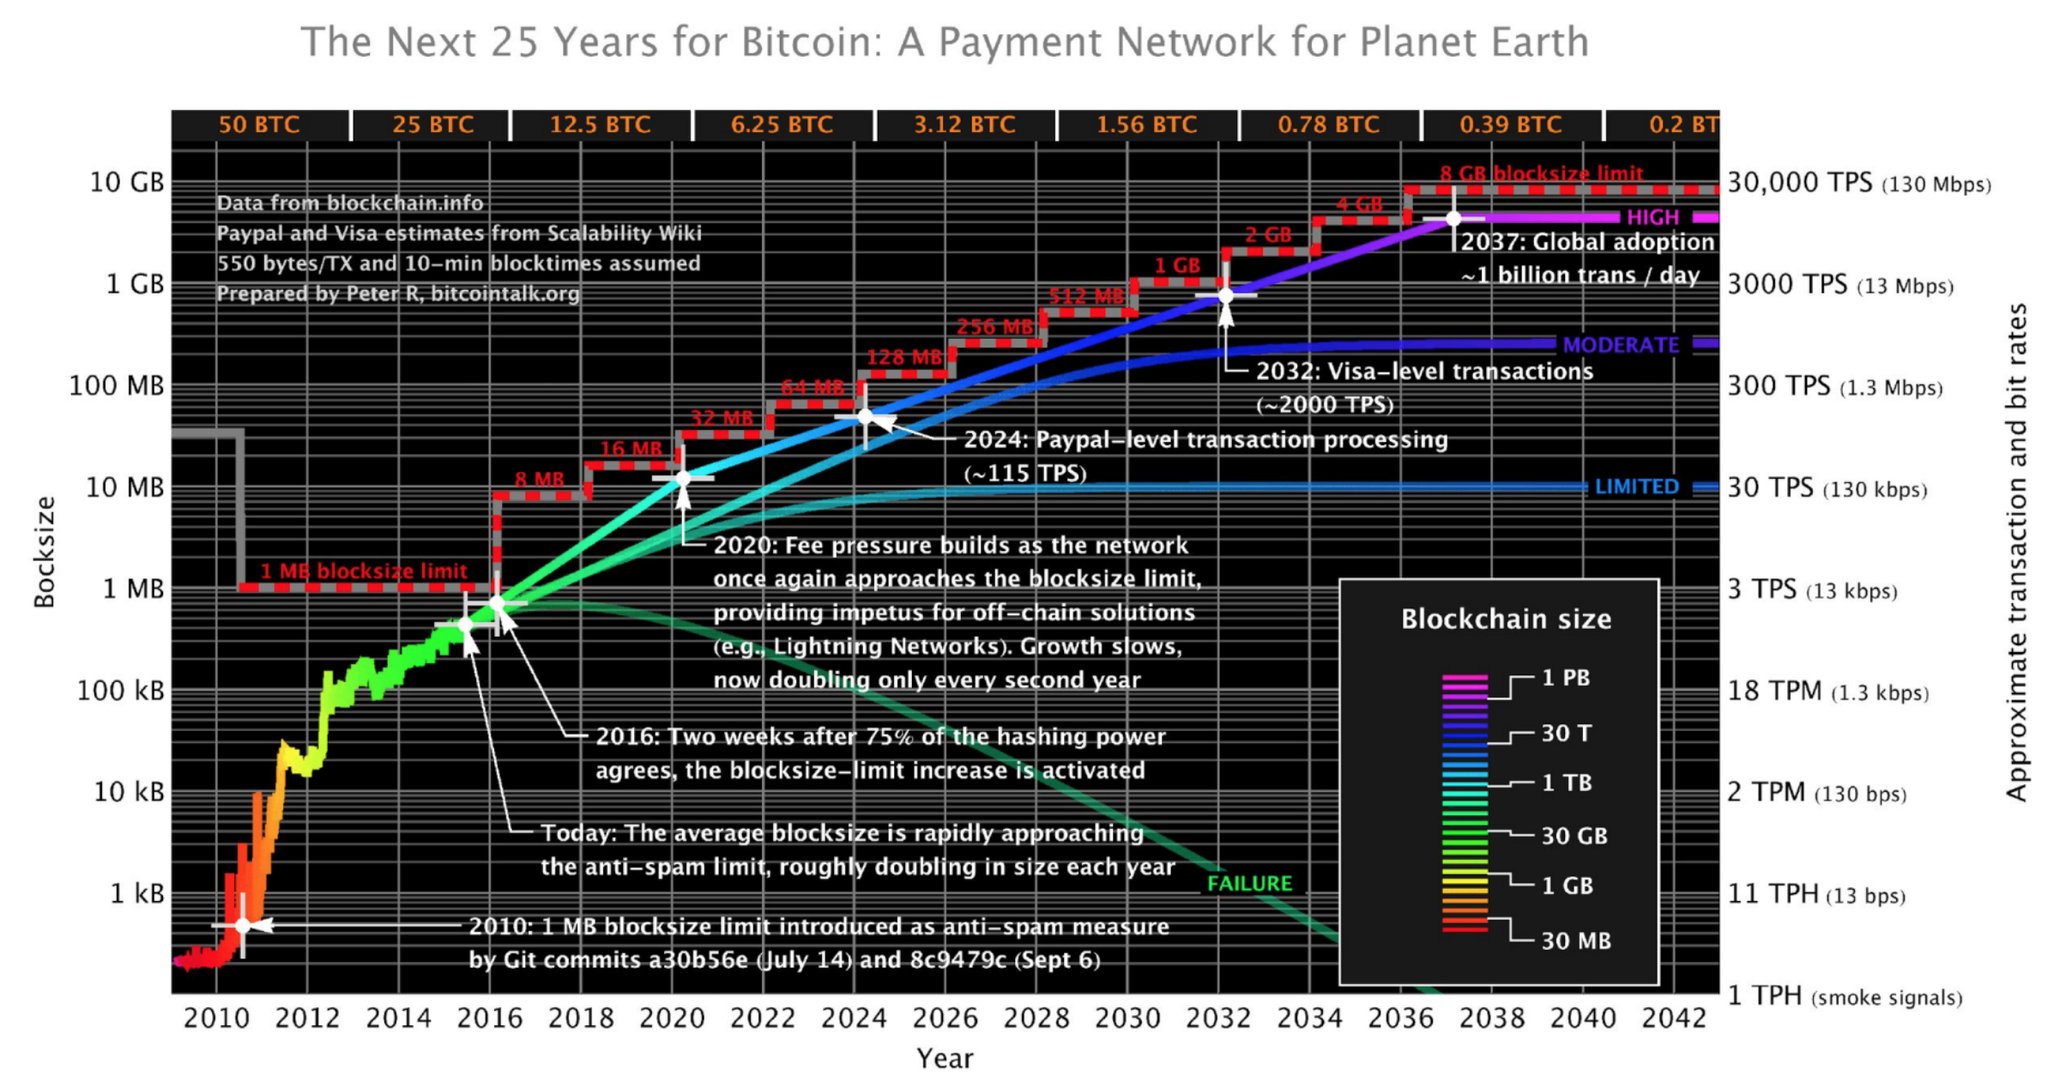 Next 25 Years for Bitcoin